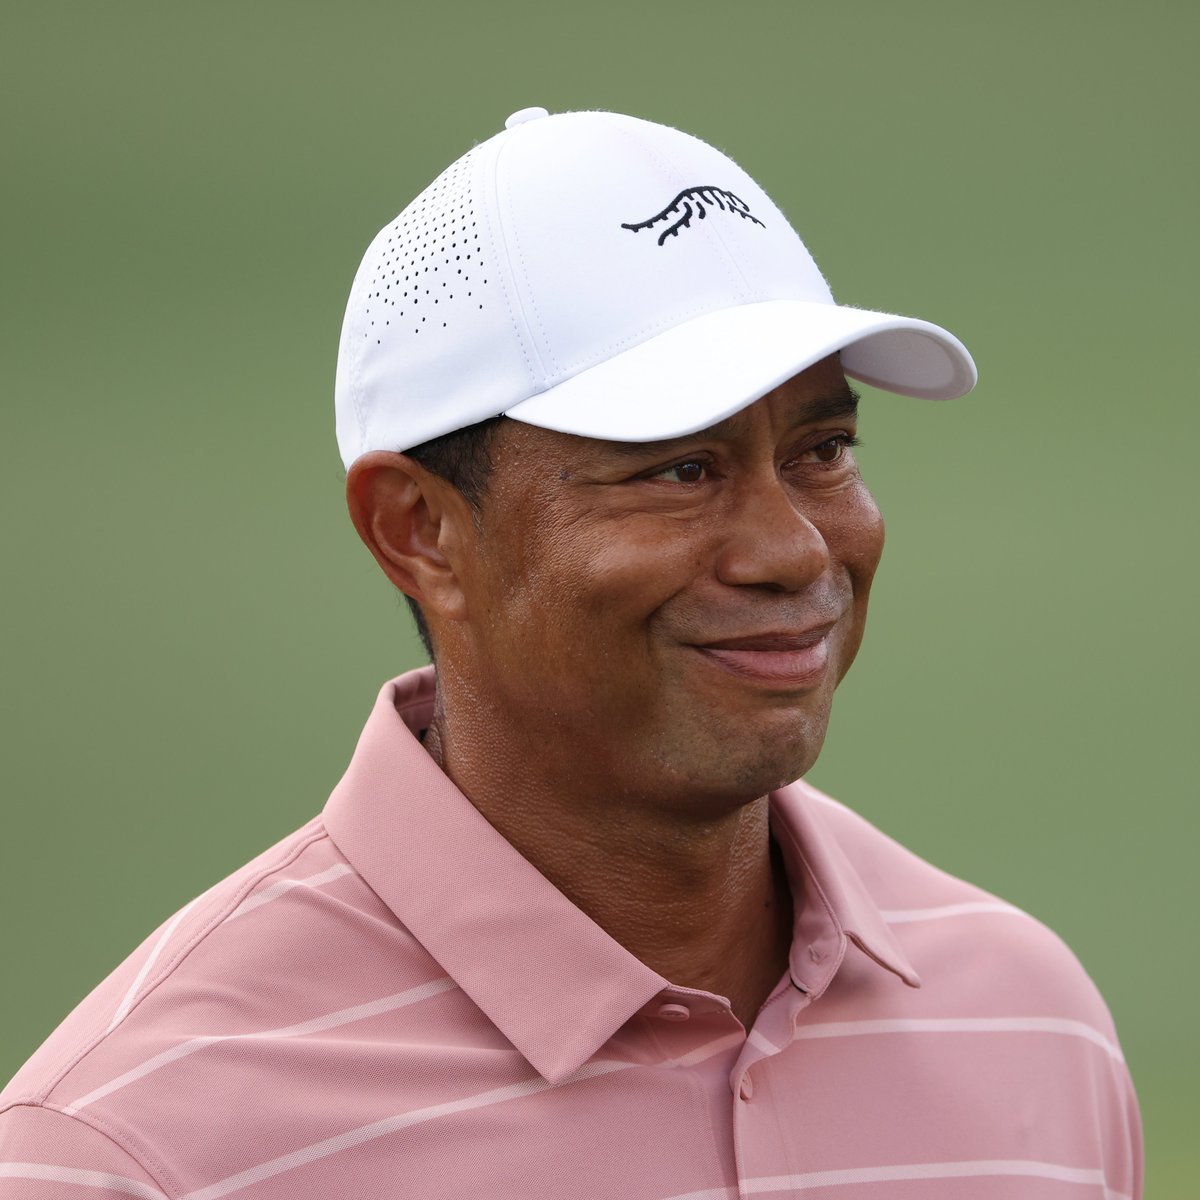 The year is 2024 and @TigerWoods is still breaking records 🐐 #TheMasters